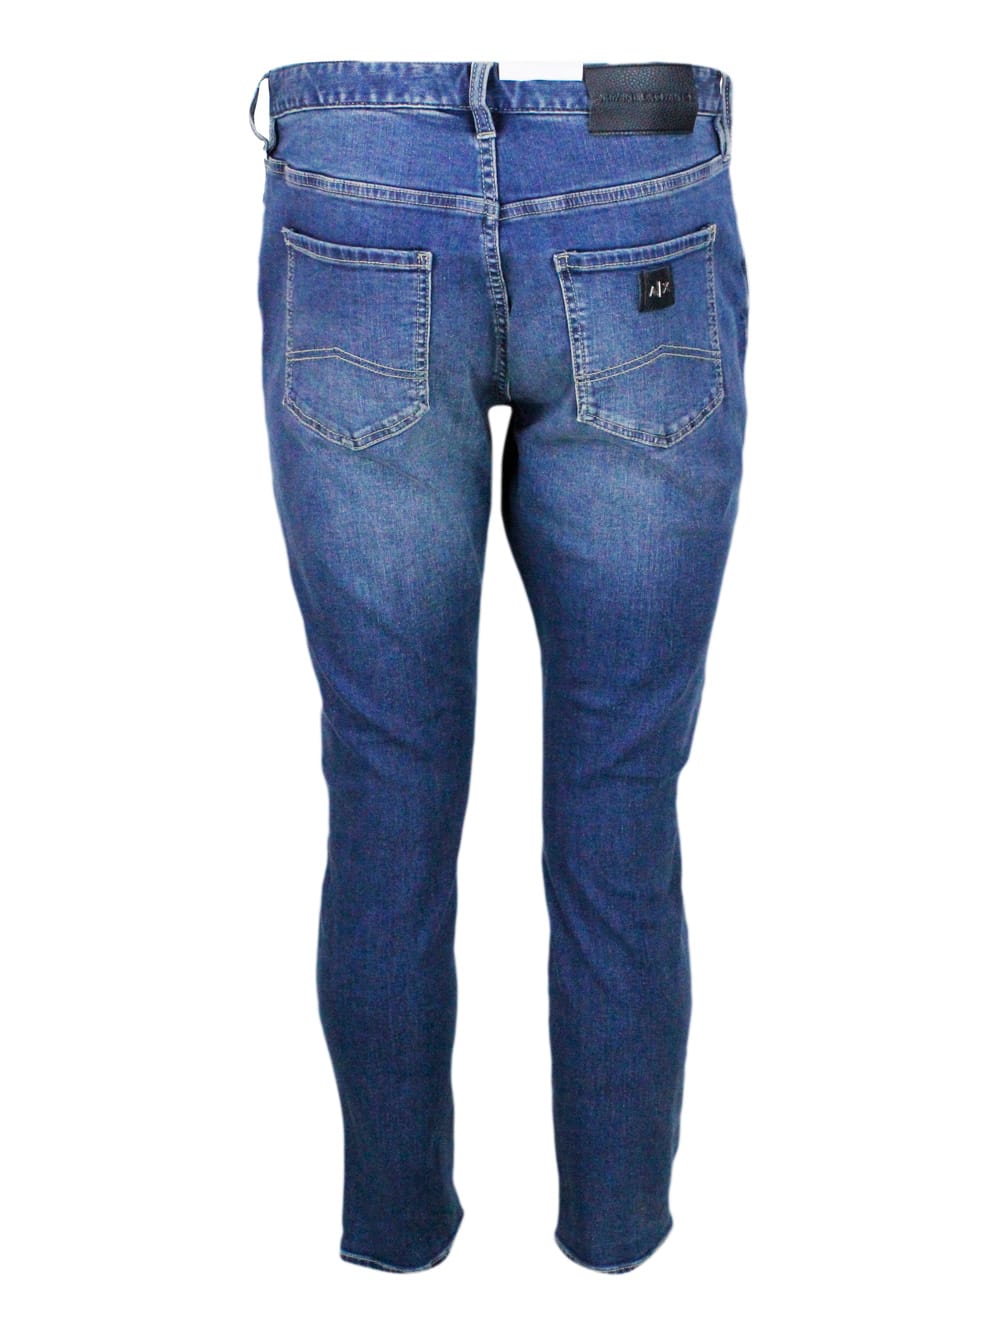 Shop Armani Collezioni Skinny Jeans In Soft Stretch Denim With Contrasting Stitching And Leather Tab. Zip And Button Closur